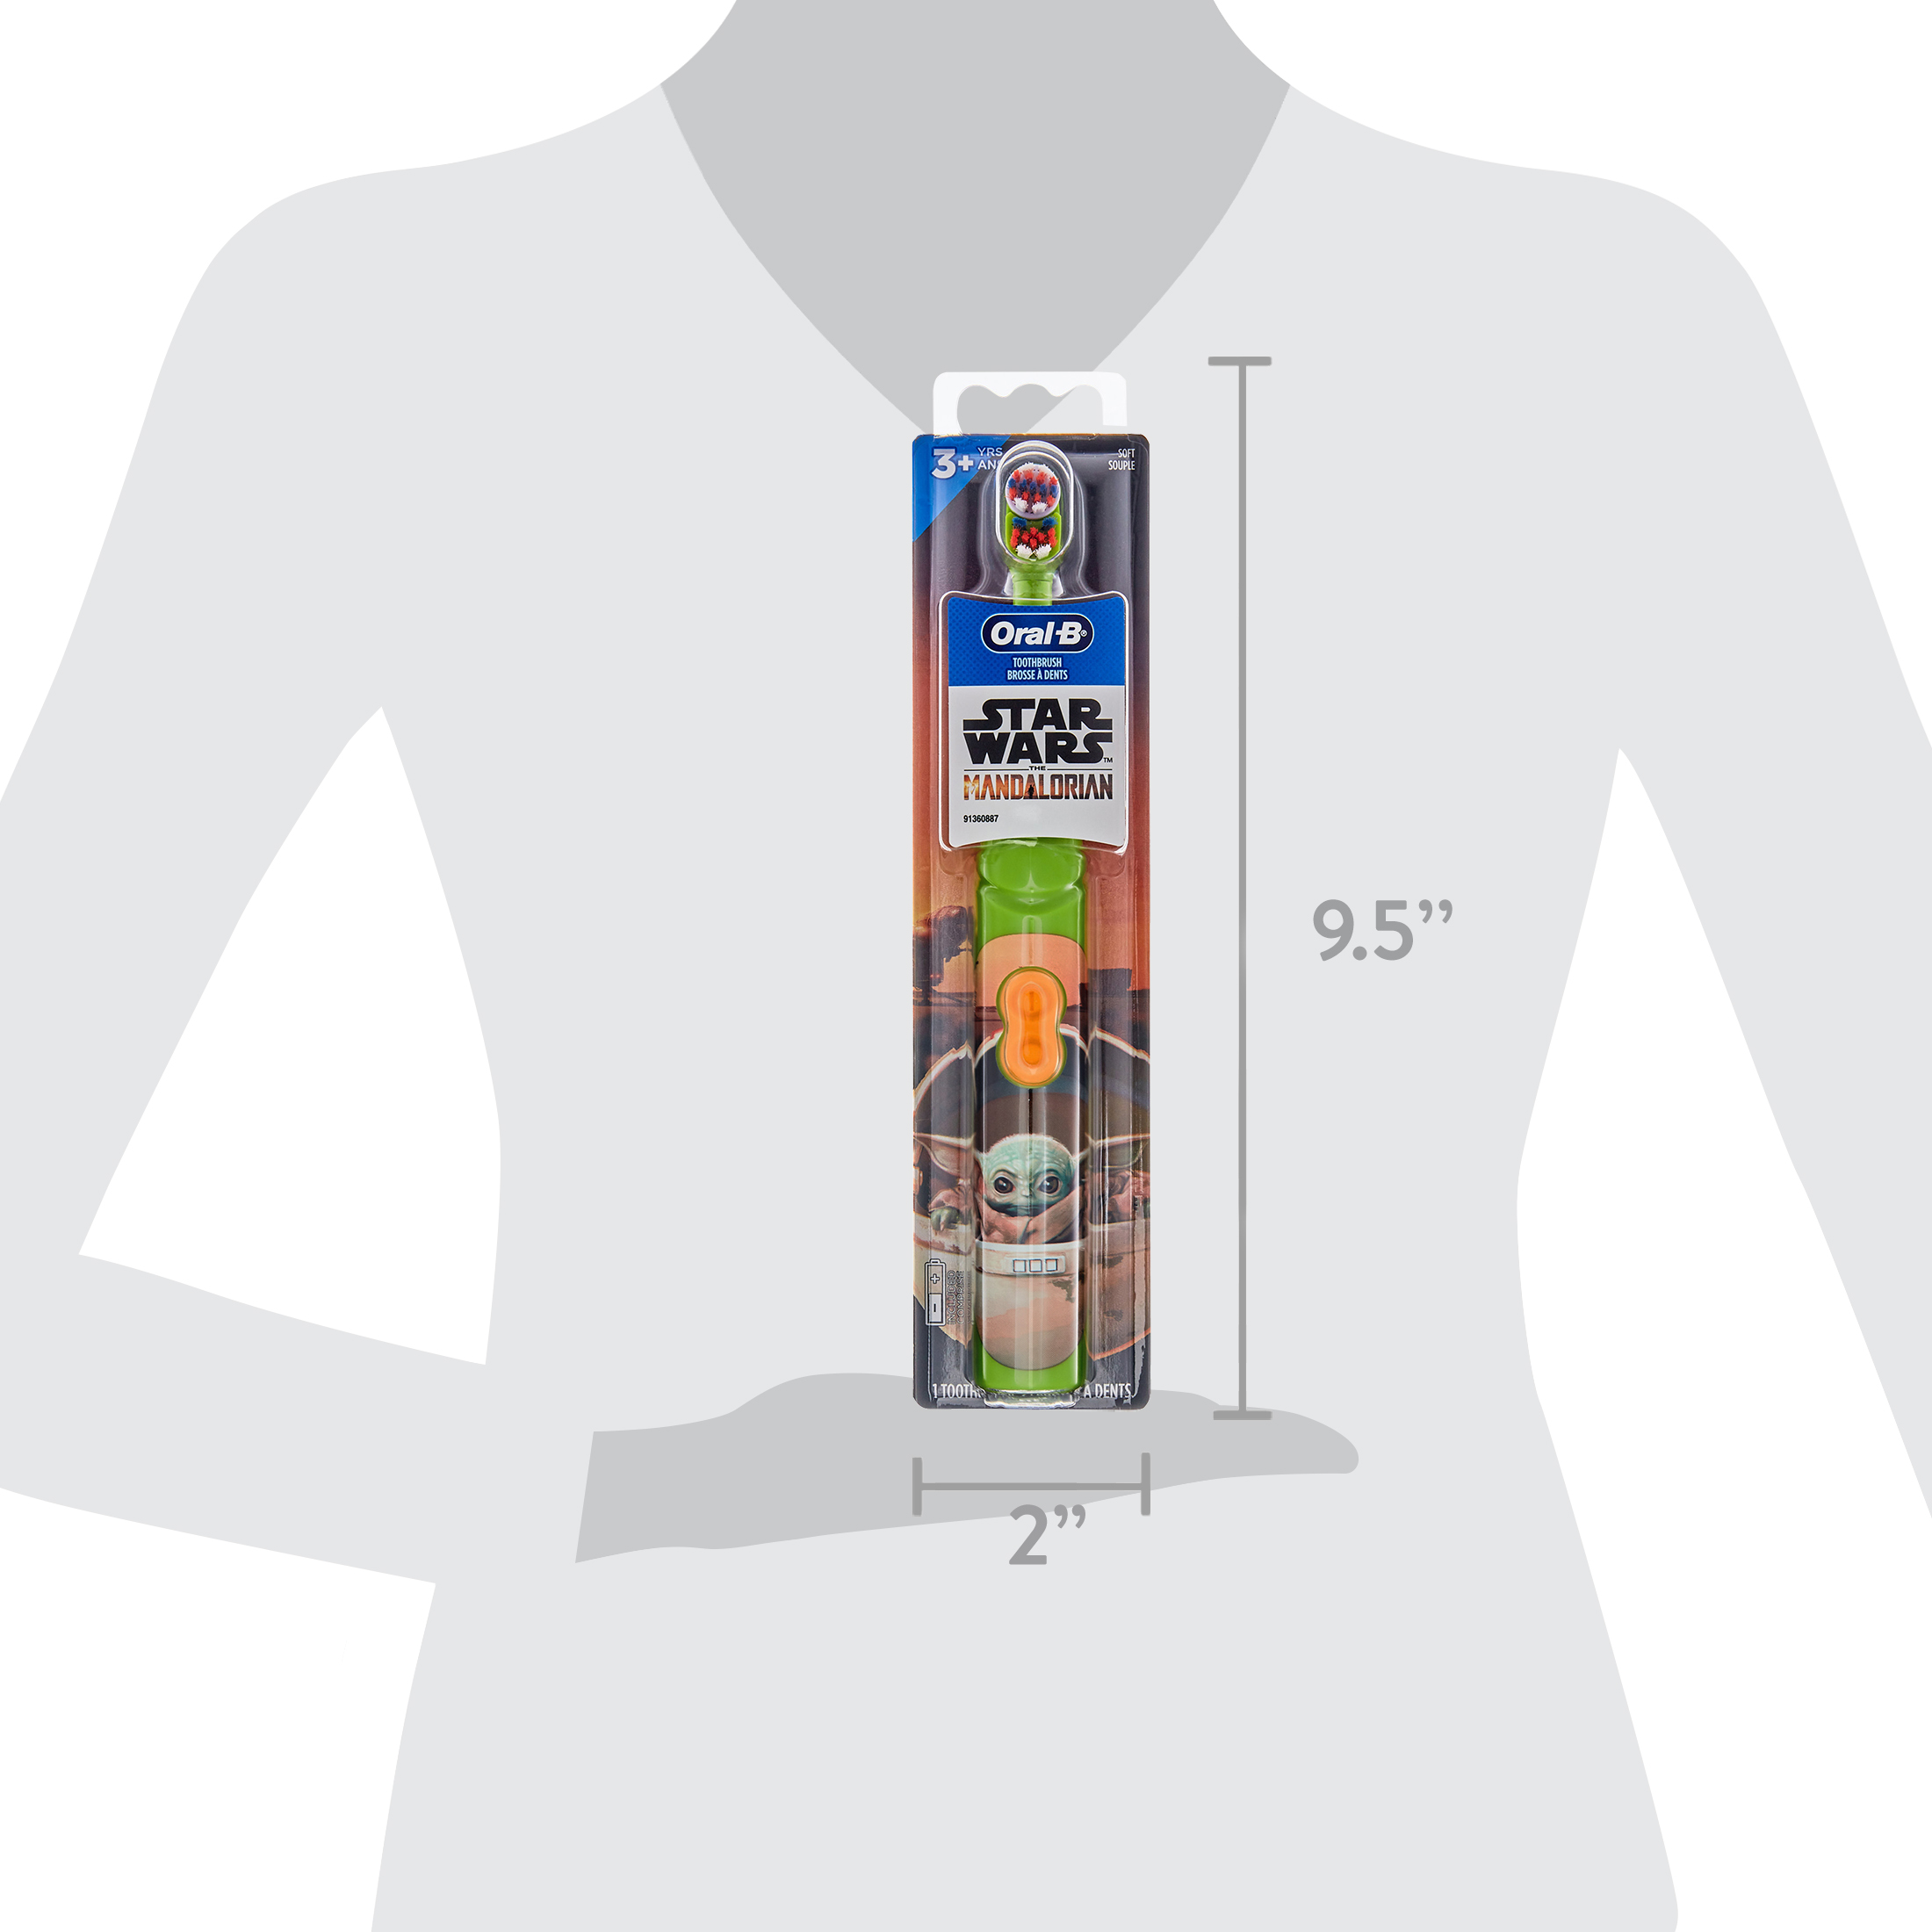 Oral-B Kid's Battery Toothbrush Featuring Lucasfilm's Mandalorian, Full Head, Soft, for Children 3+ - image 8 of 8